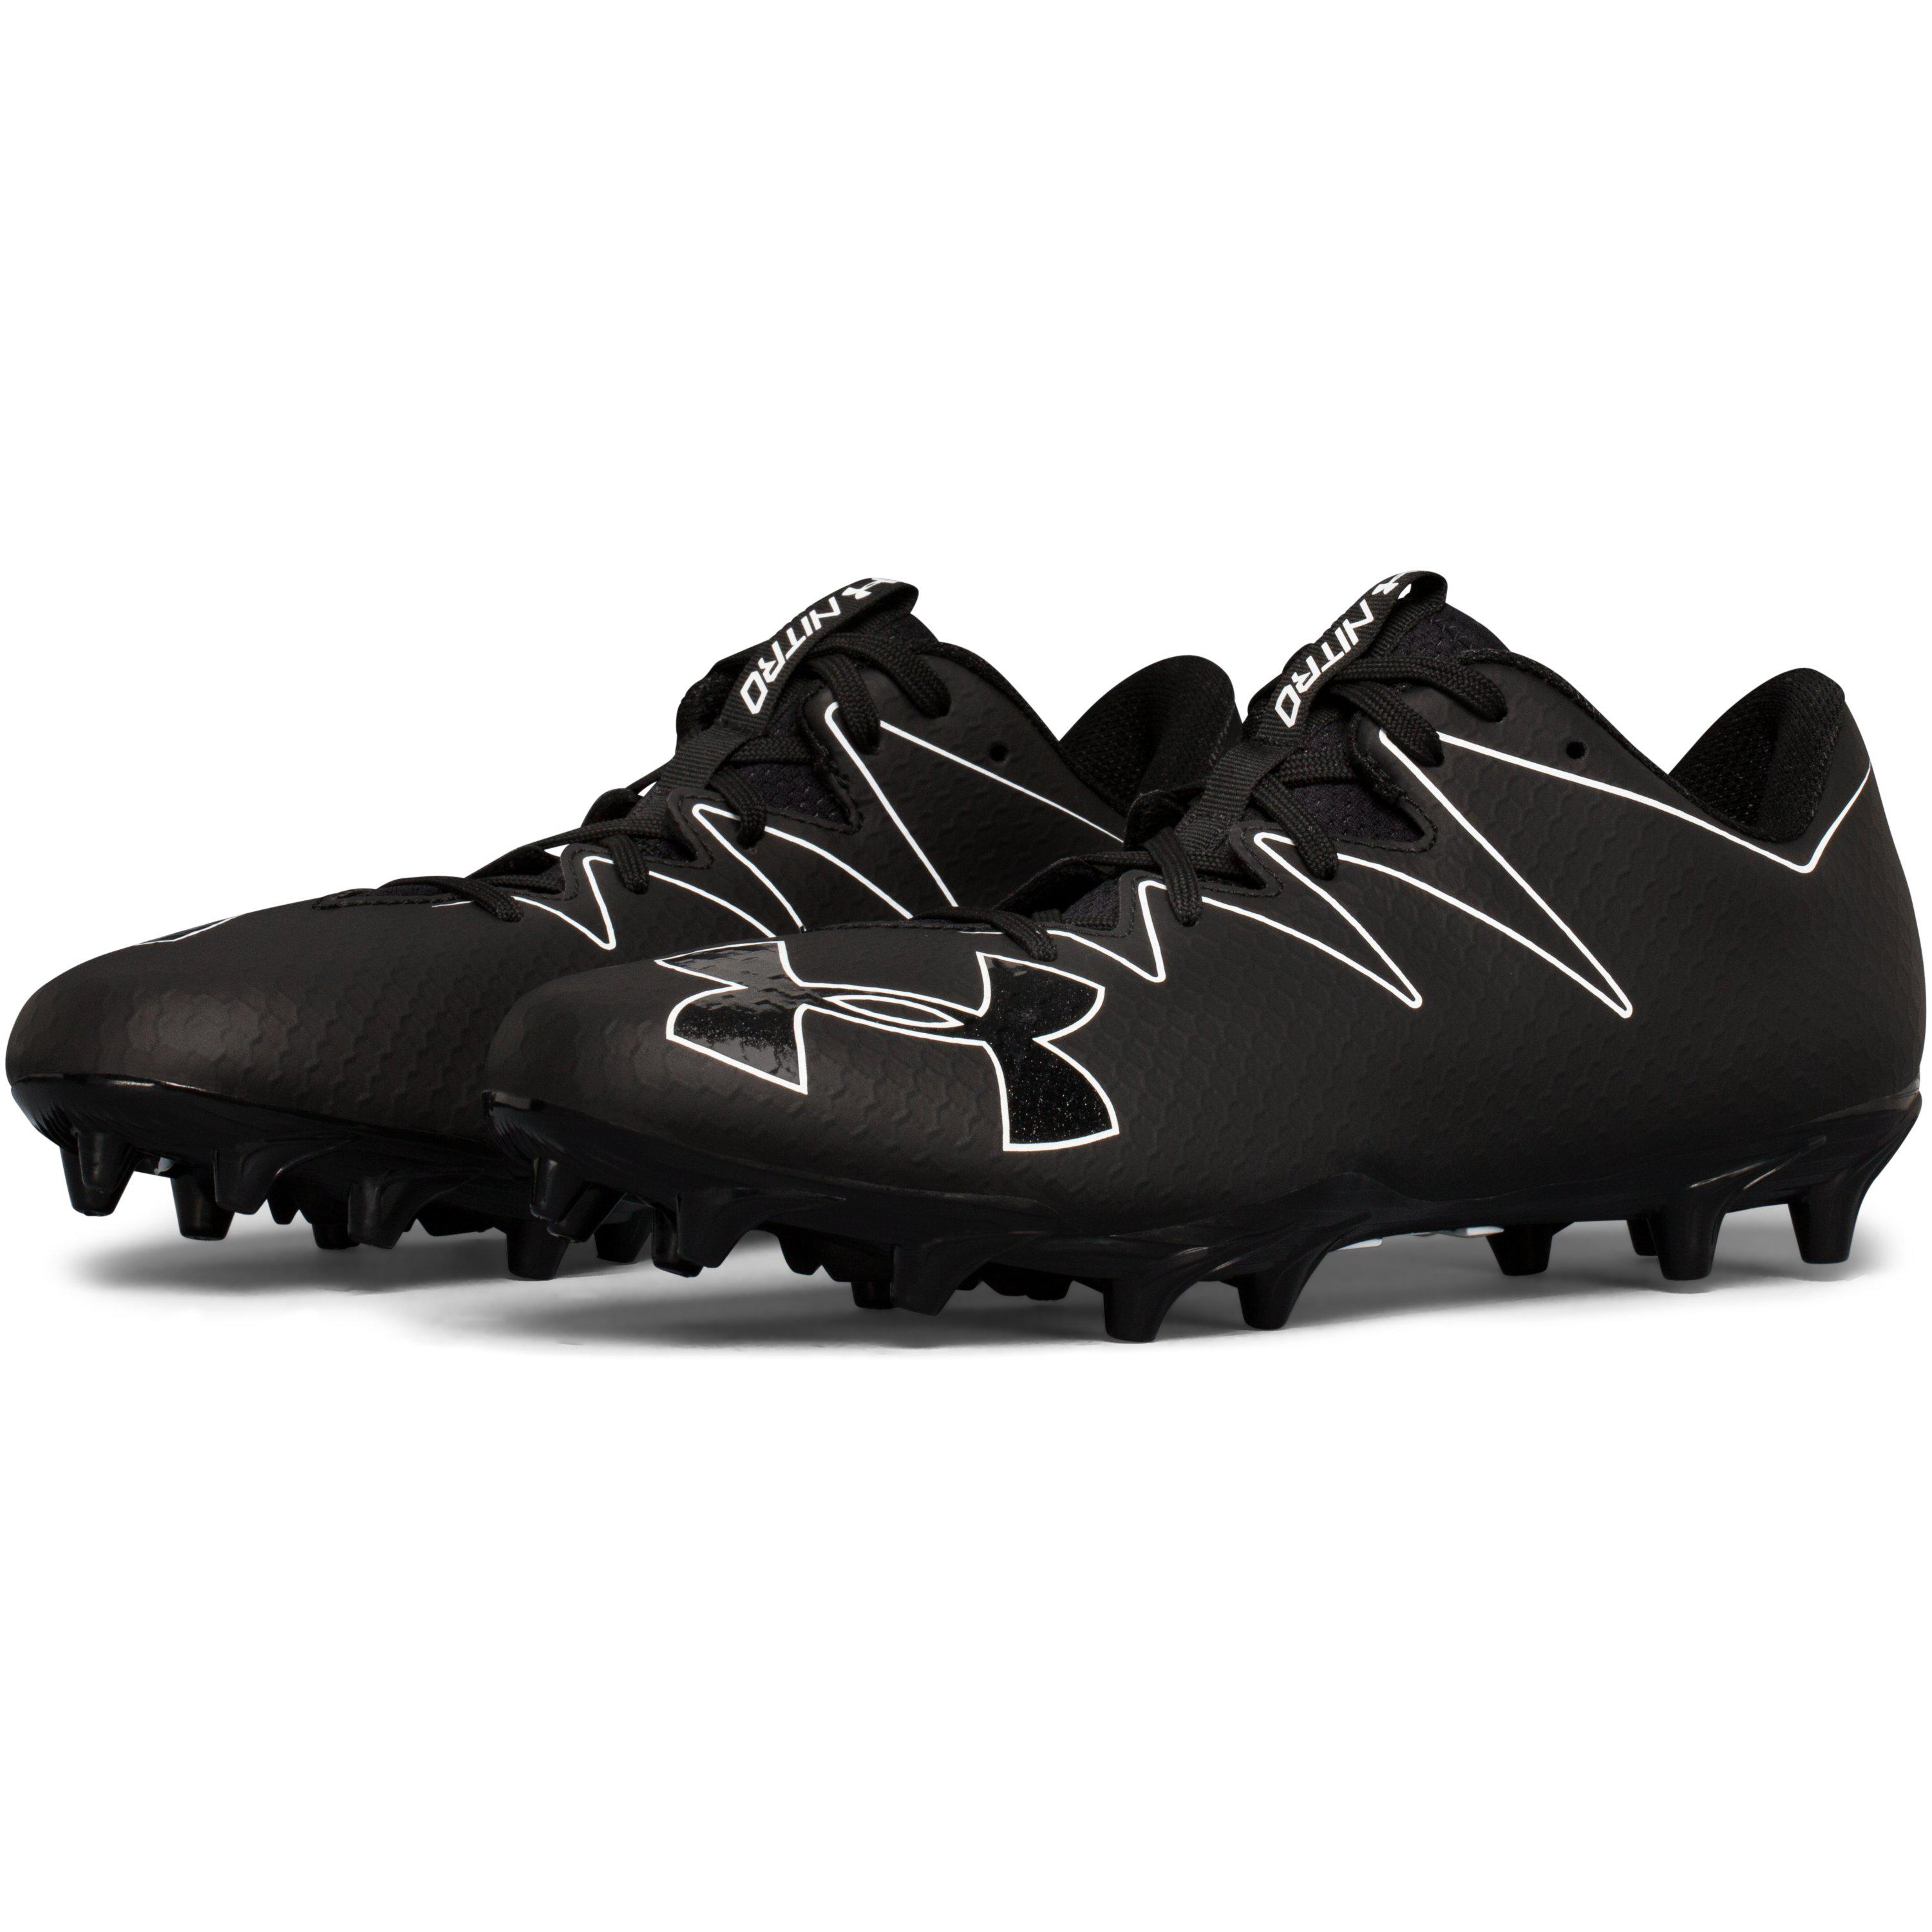 Details about   Mens Under Armour Nitro Low MC Football Cleats Black 3000182-001 New 